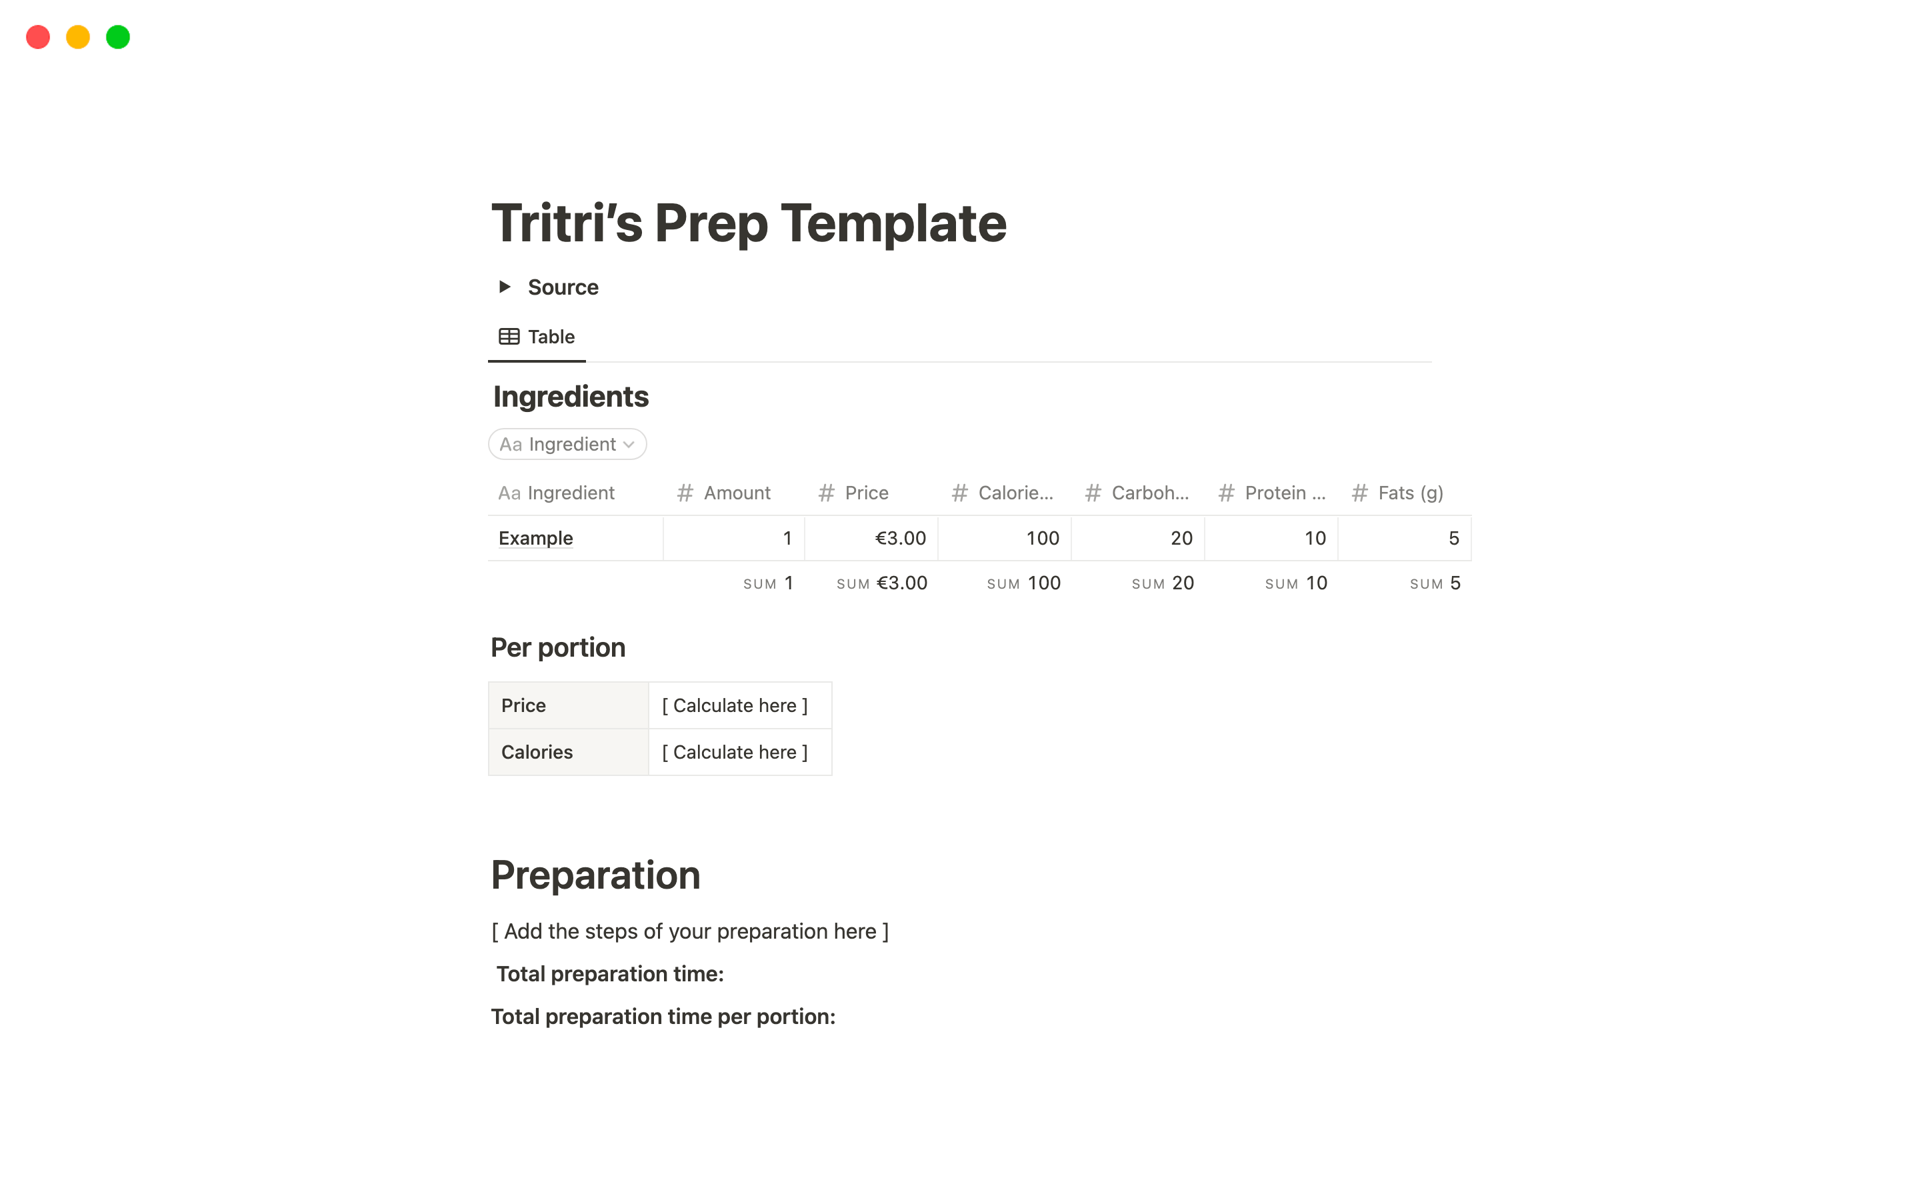 This template allows you to track recipes in a simple manner